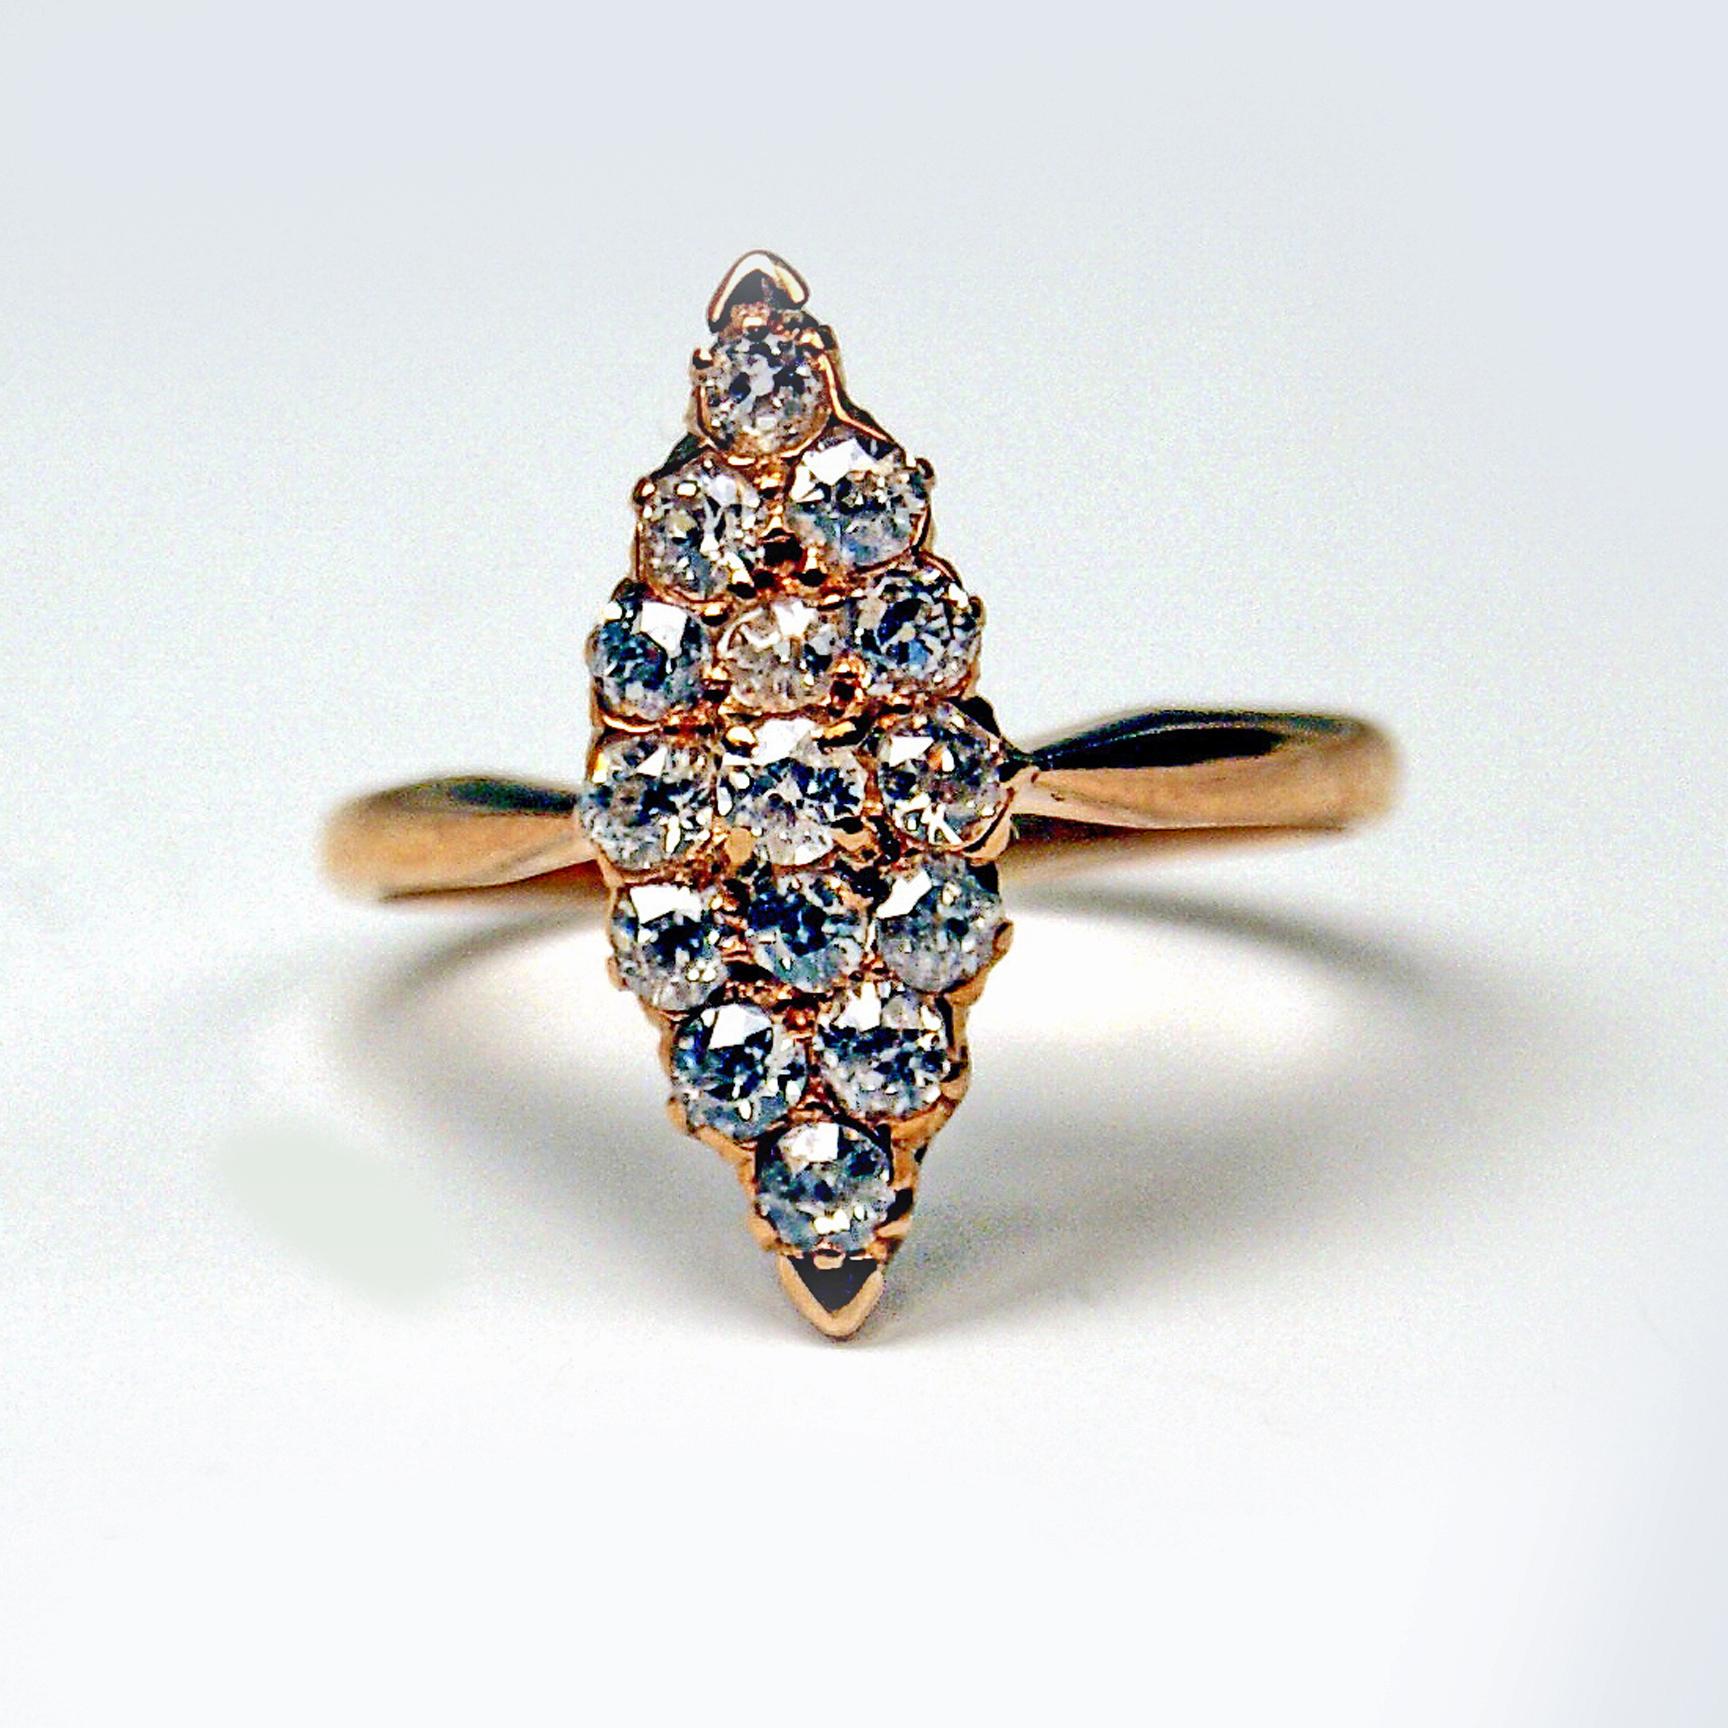 Art Nouveau most elegant ring:
NAVETTE DIAMONDS IN MIDDLE AREA  (VINTAGE CUTS / 0.75 Carat)

This superb Navette Ring is embellished with gorgeous rose-cut diamonds manufactured in excellent manner. Vintage 14ct rose gold alloy. - Please note that